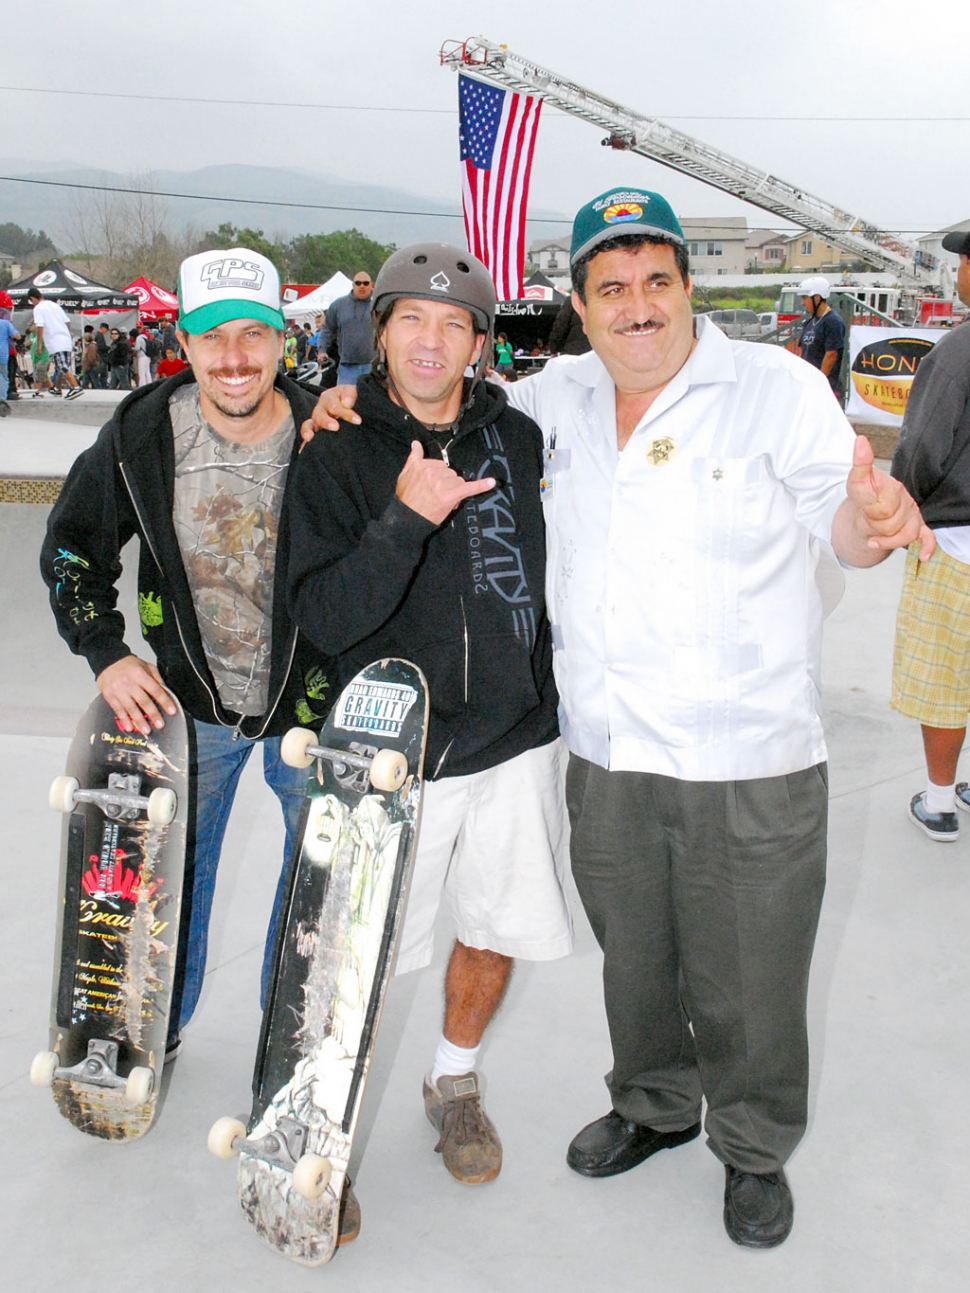 Right, Jesus “Chuy” Ortiz, owner of El Pescador, is pictured with skate pro’s at the new skate park.